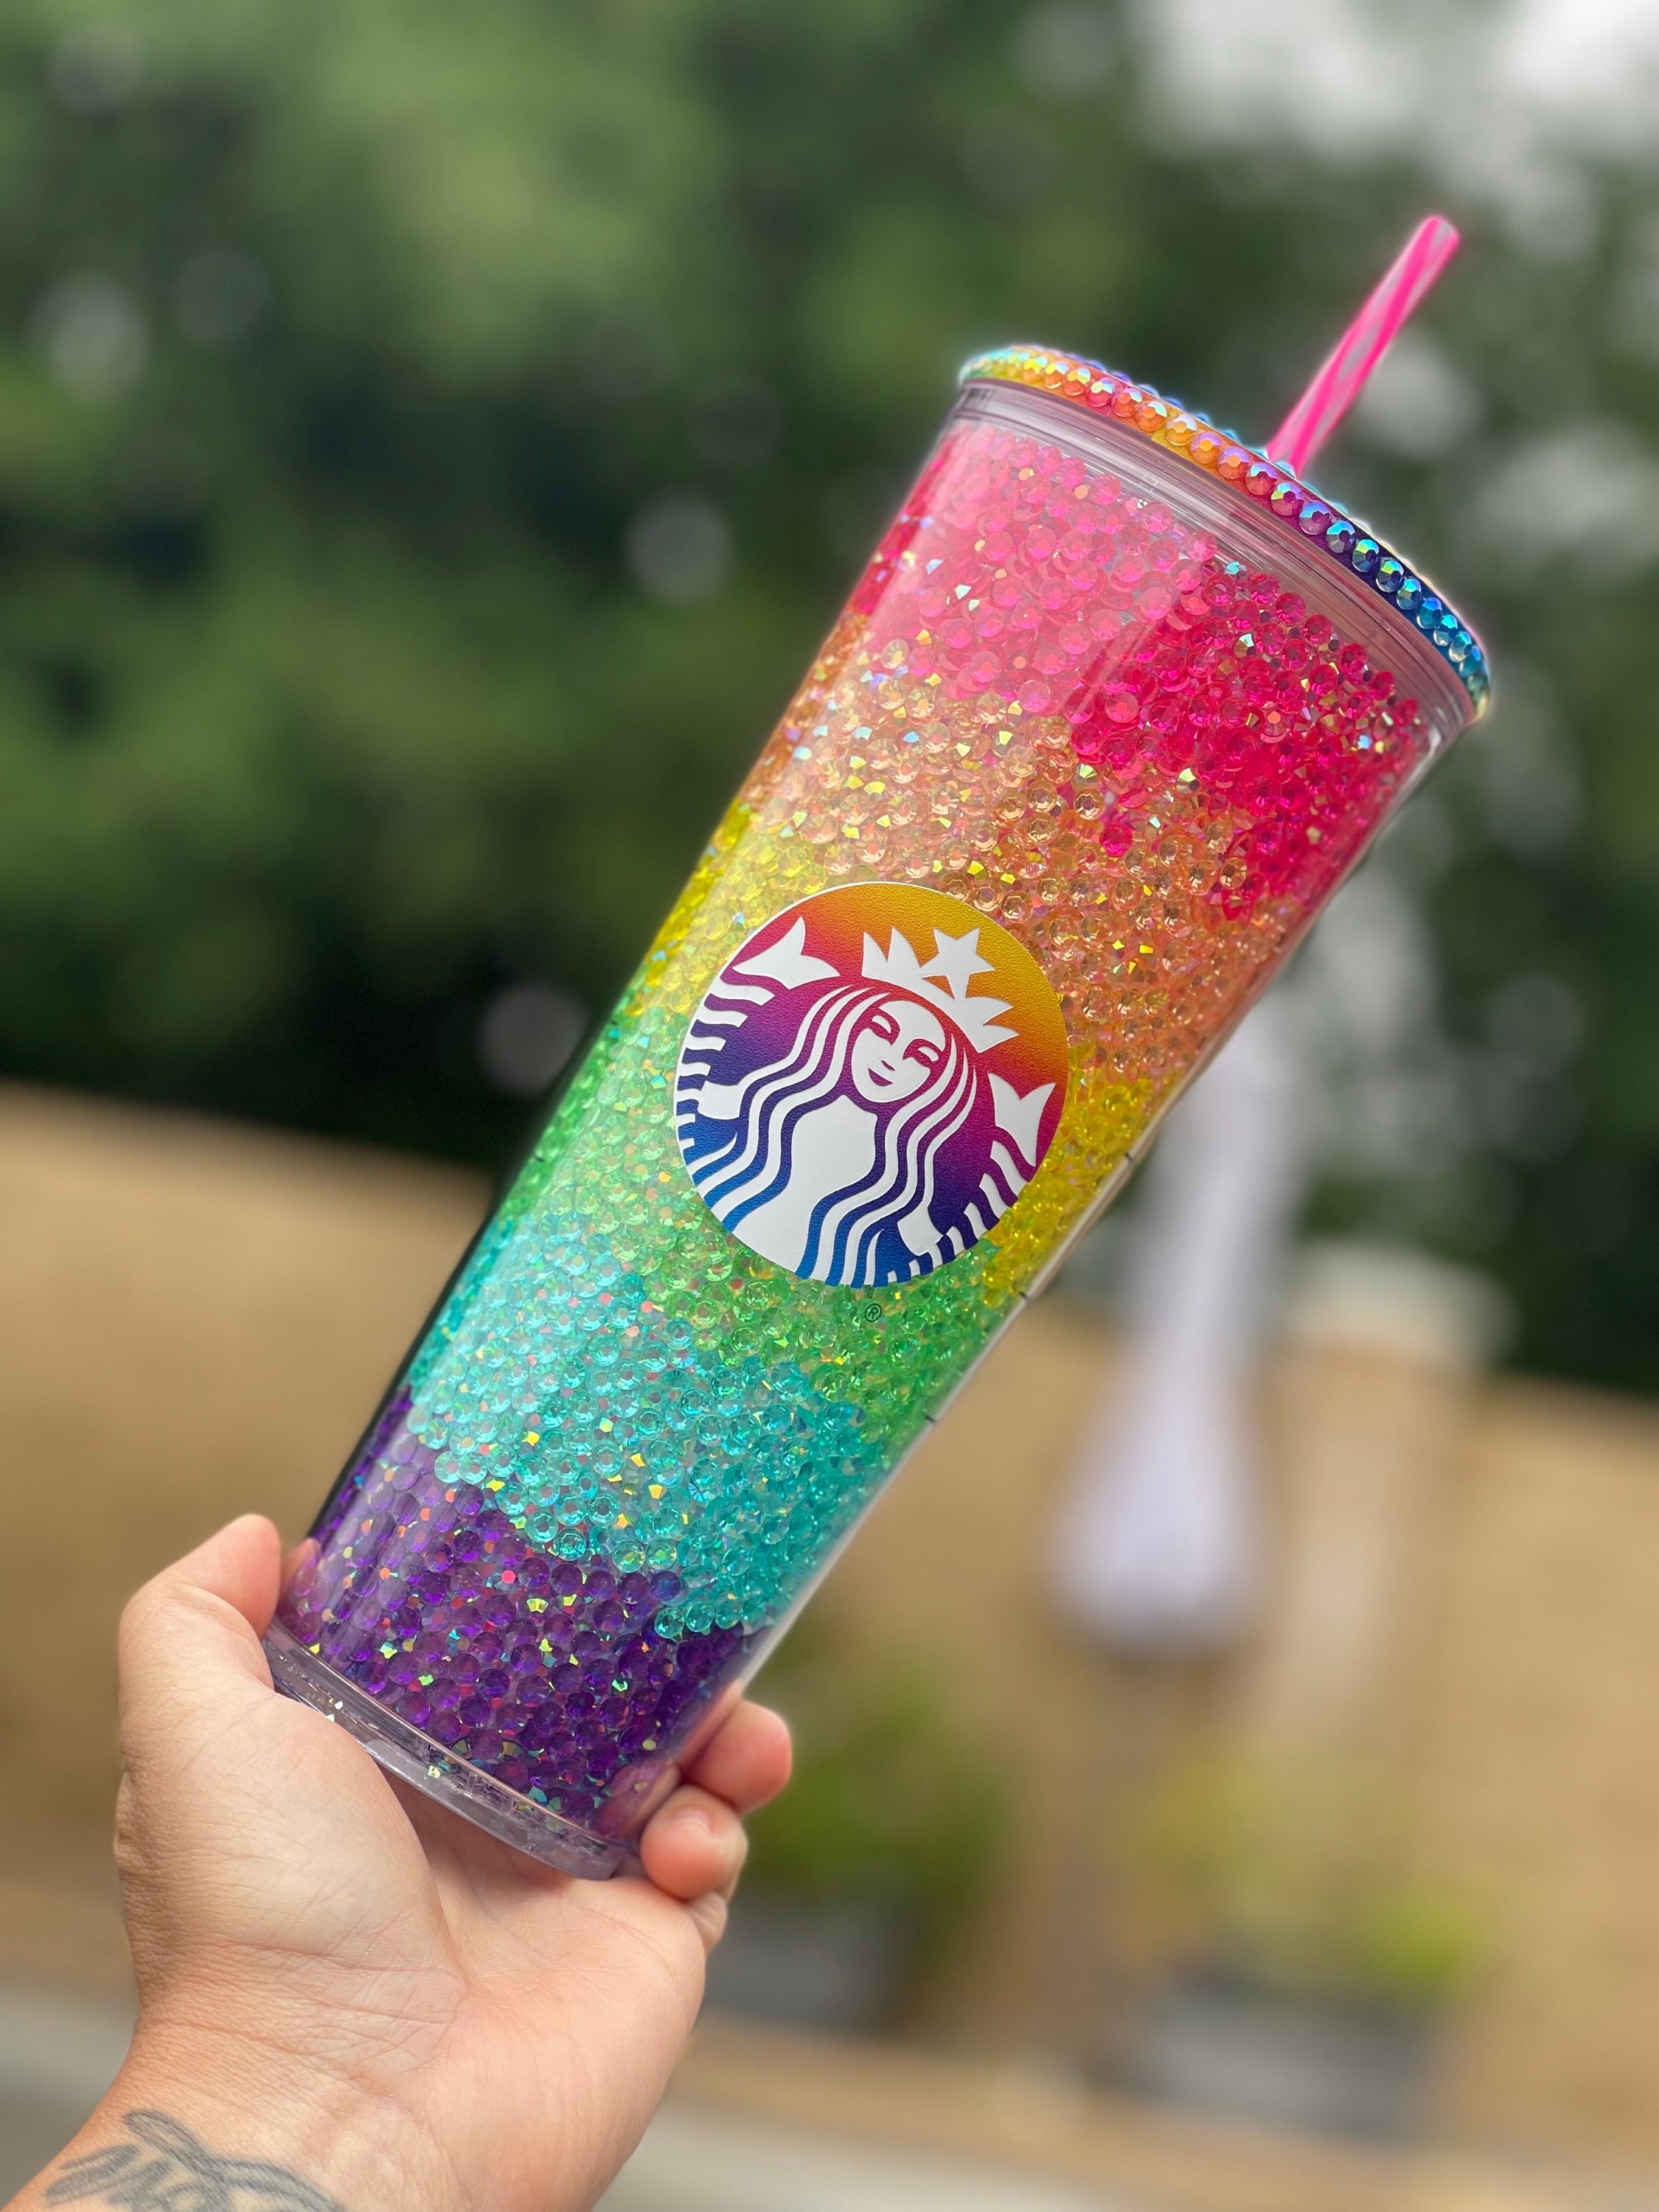 Starbucks Personalized Faux Glitter Tumbler Cup, Purple Tumbler Cup, Tumbler  with Lid Straw, Starbucks Gift, Faux Glitter Tumbler Cup, Mugs and Cups